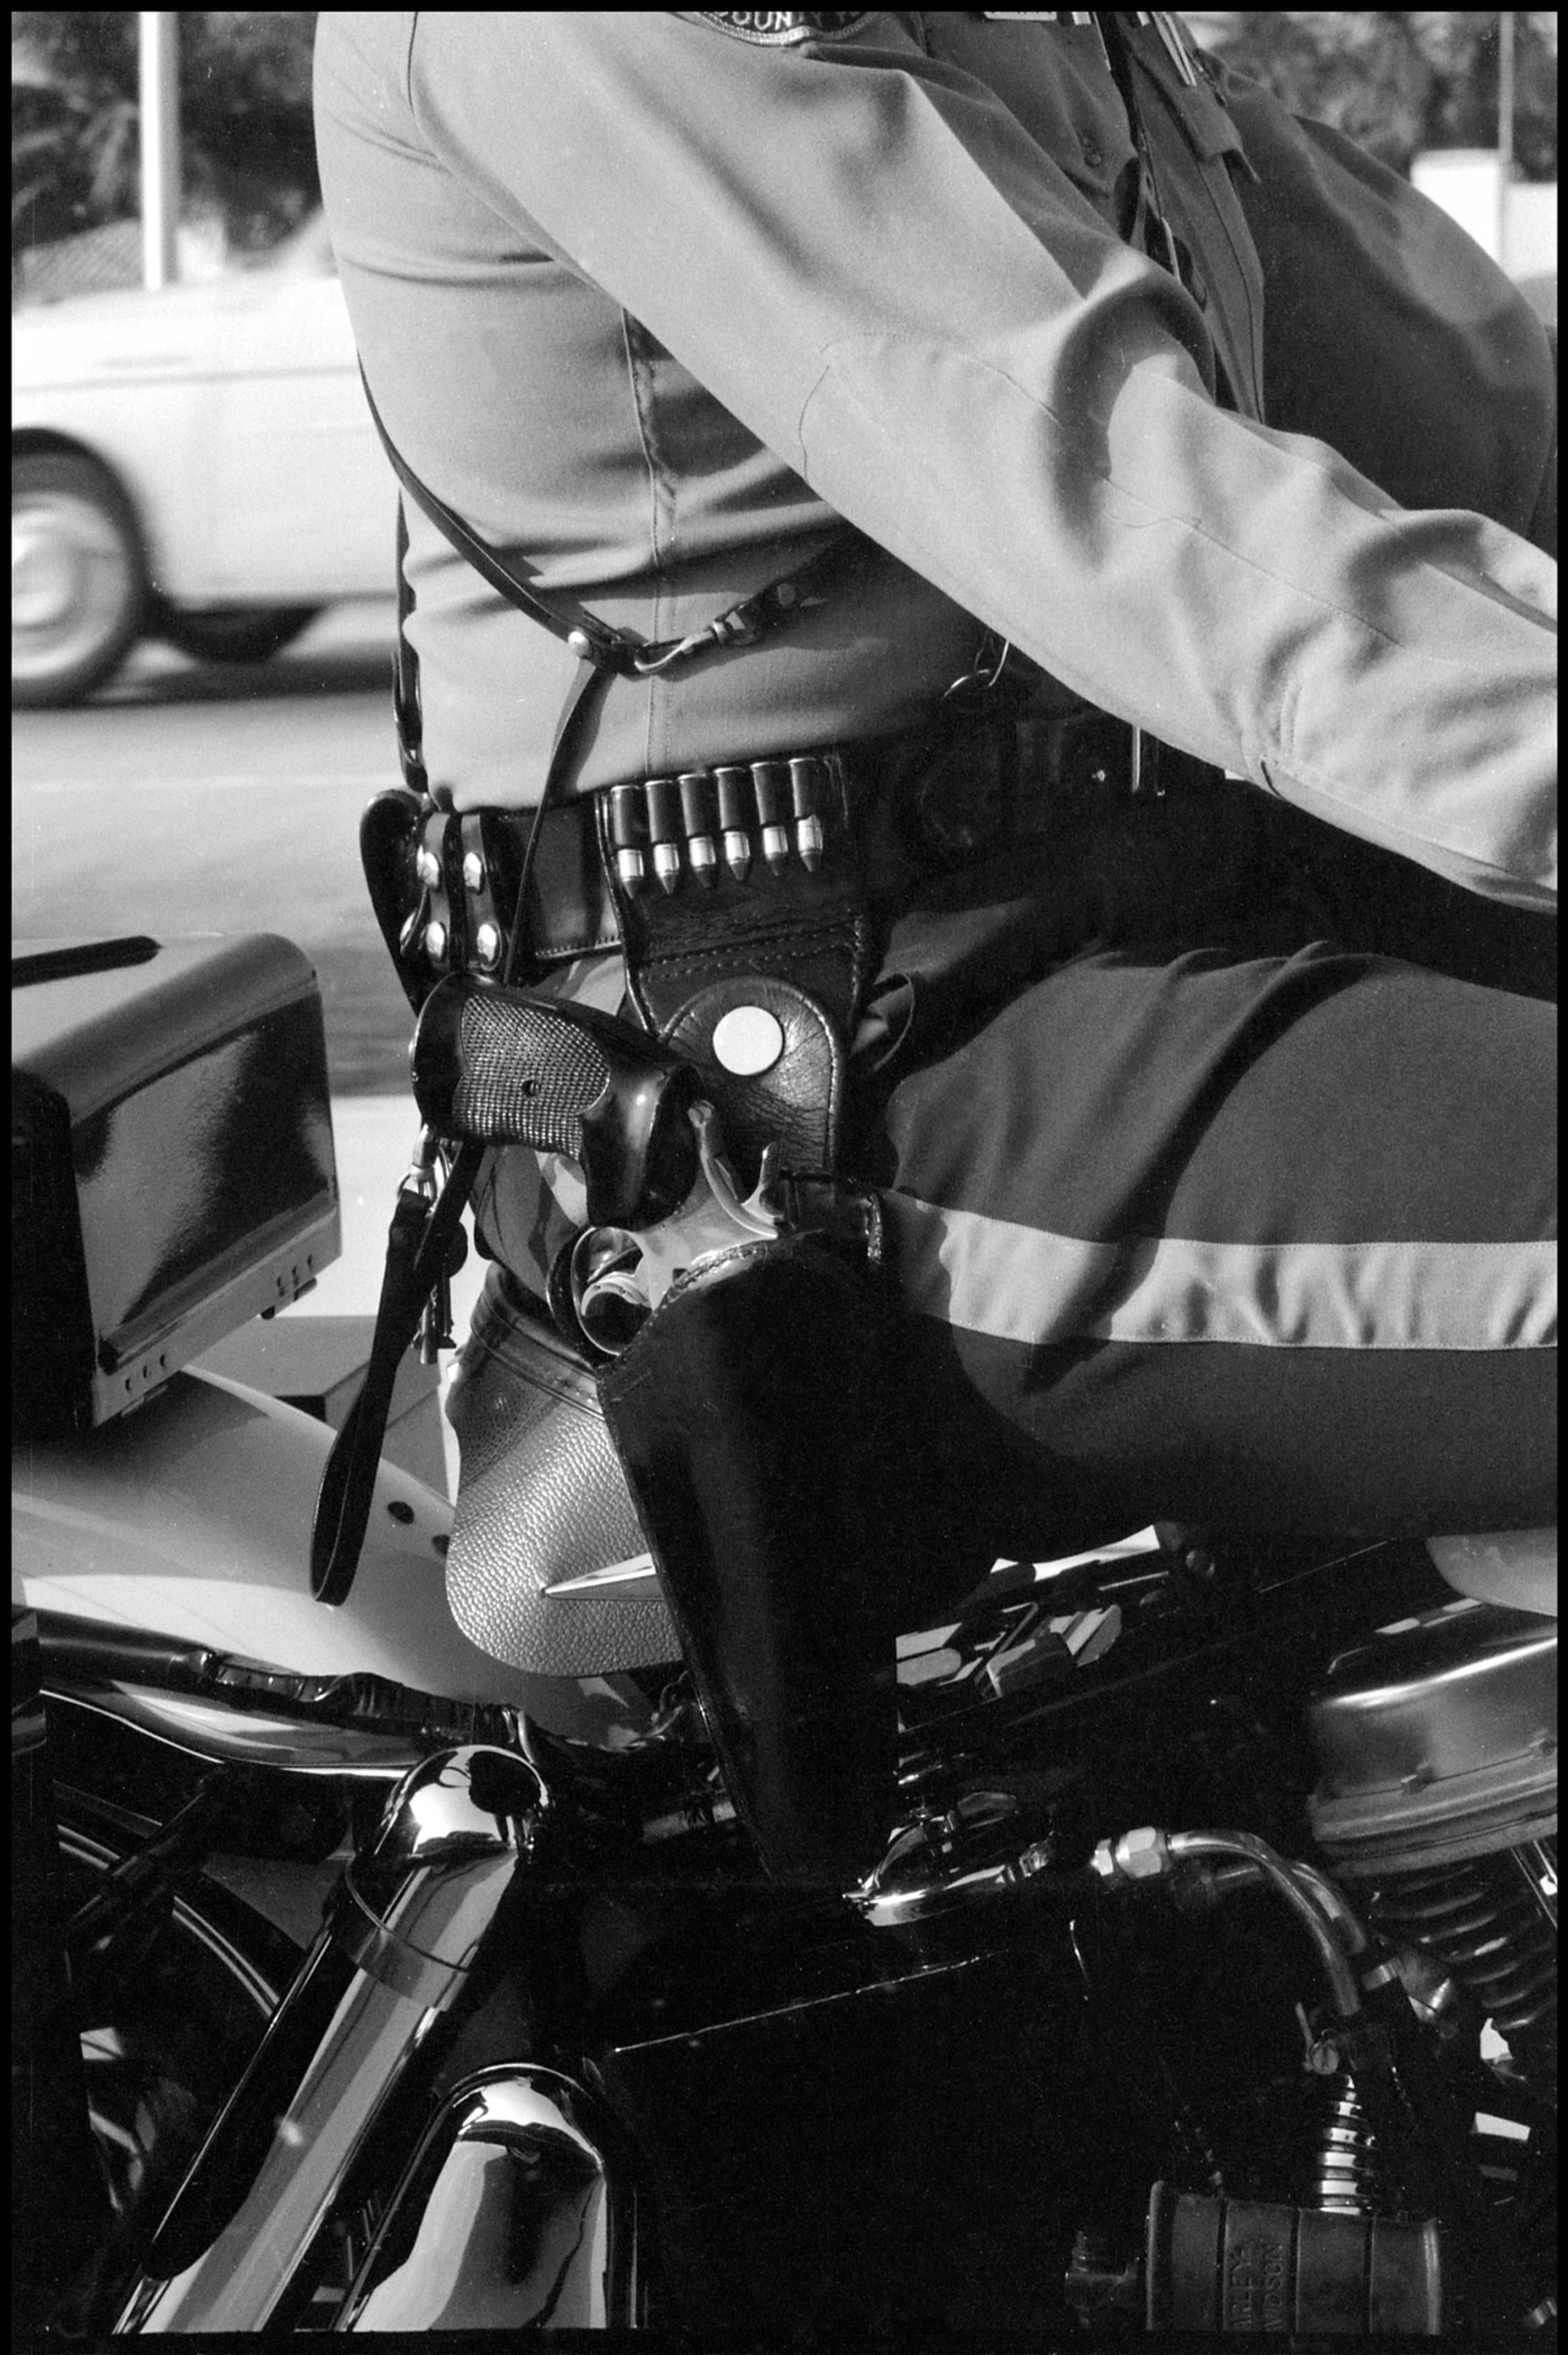 Black and white photo showing a gun on a policeman's belt